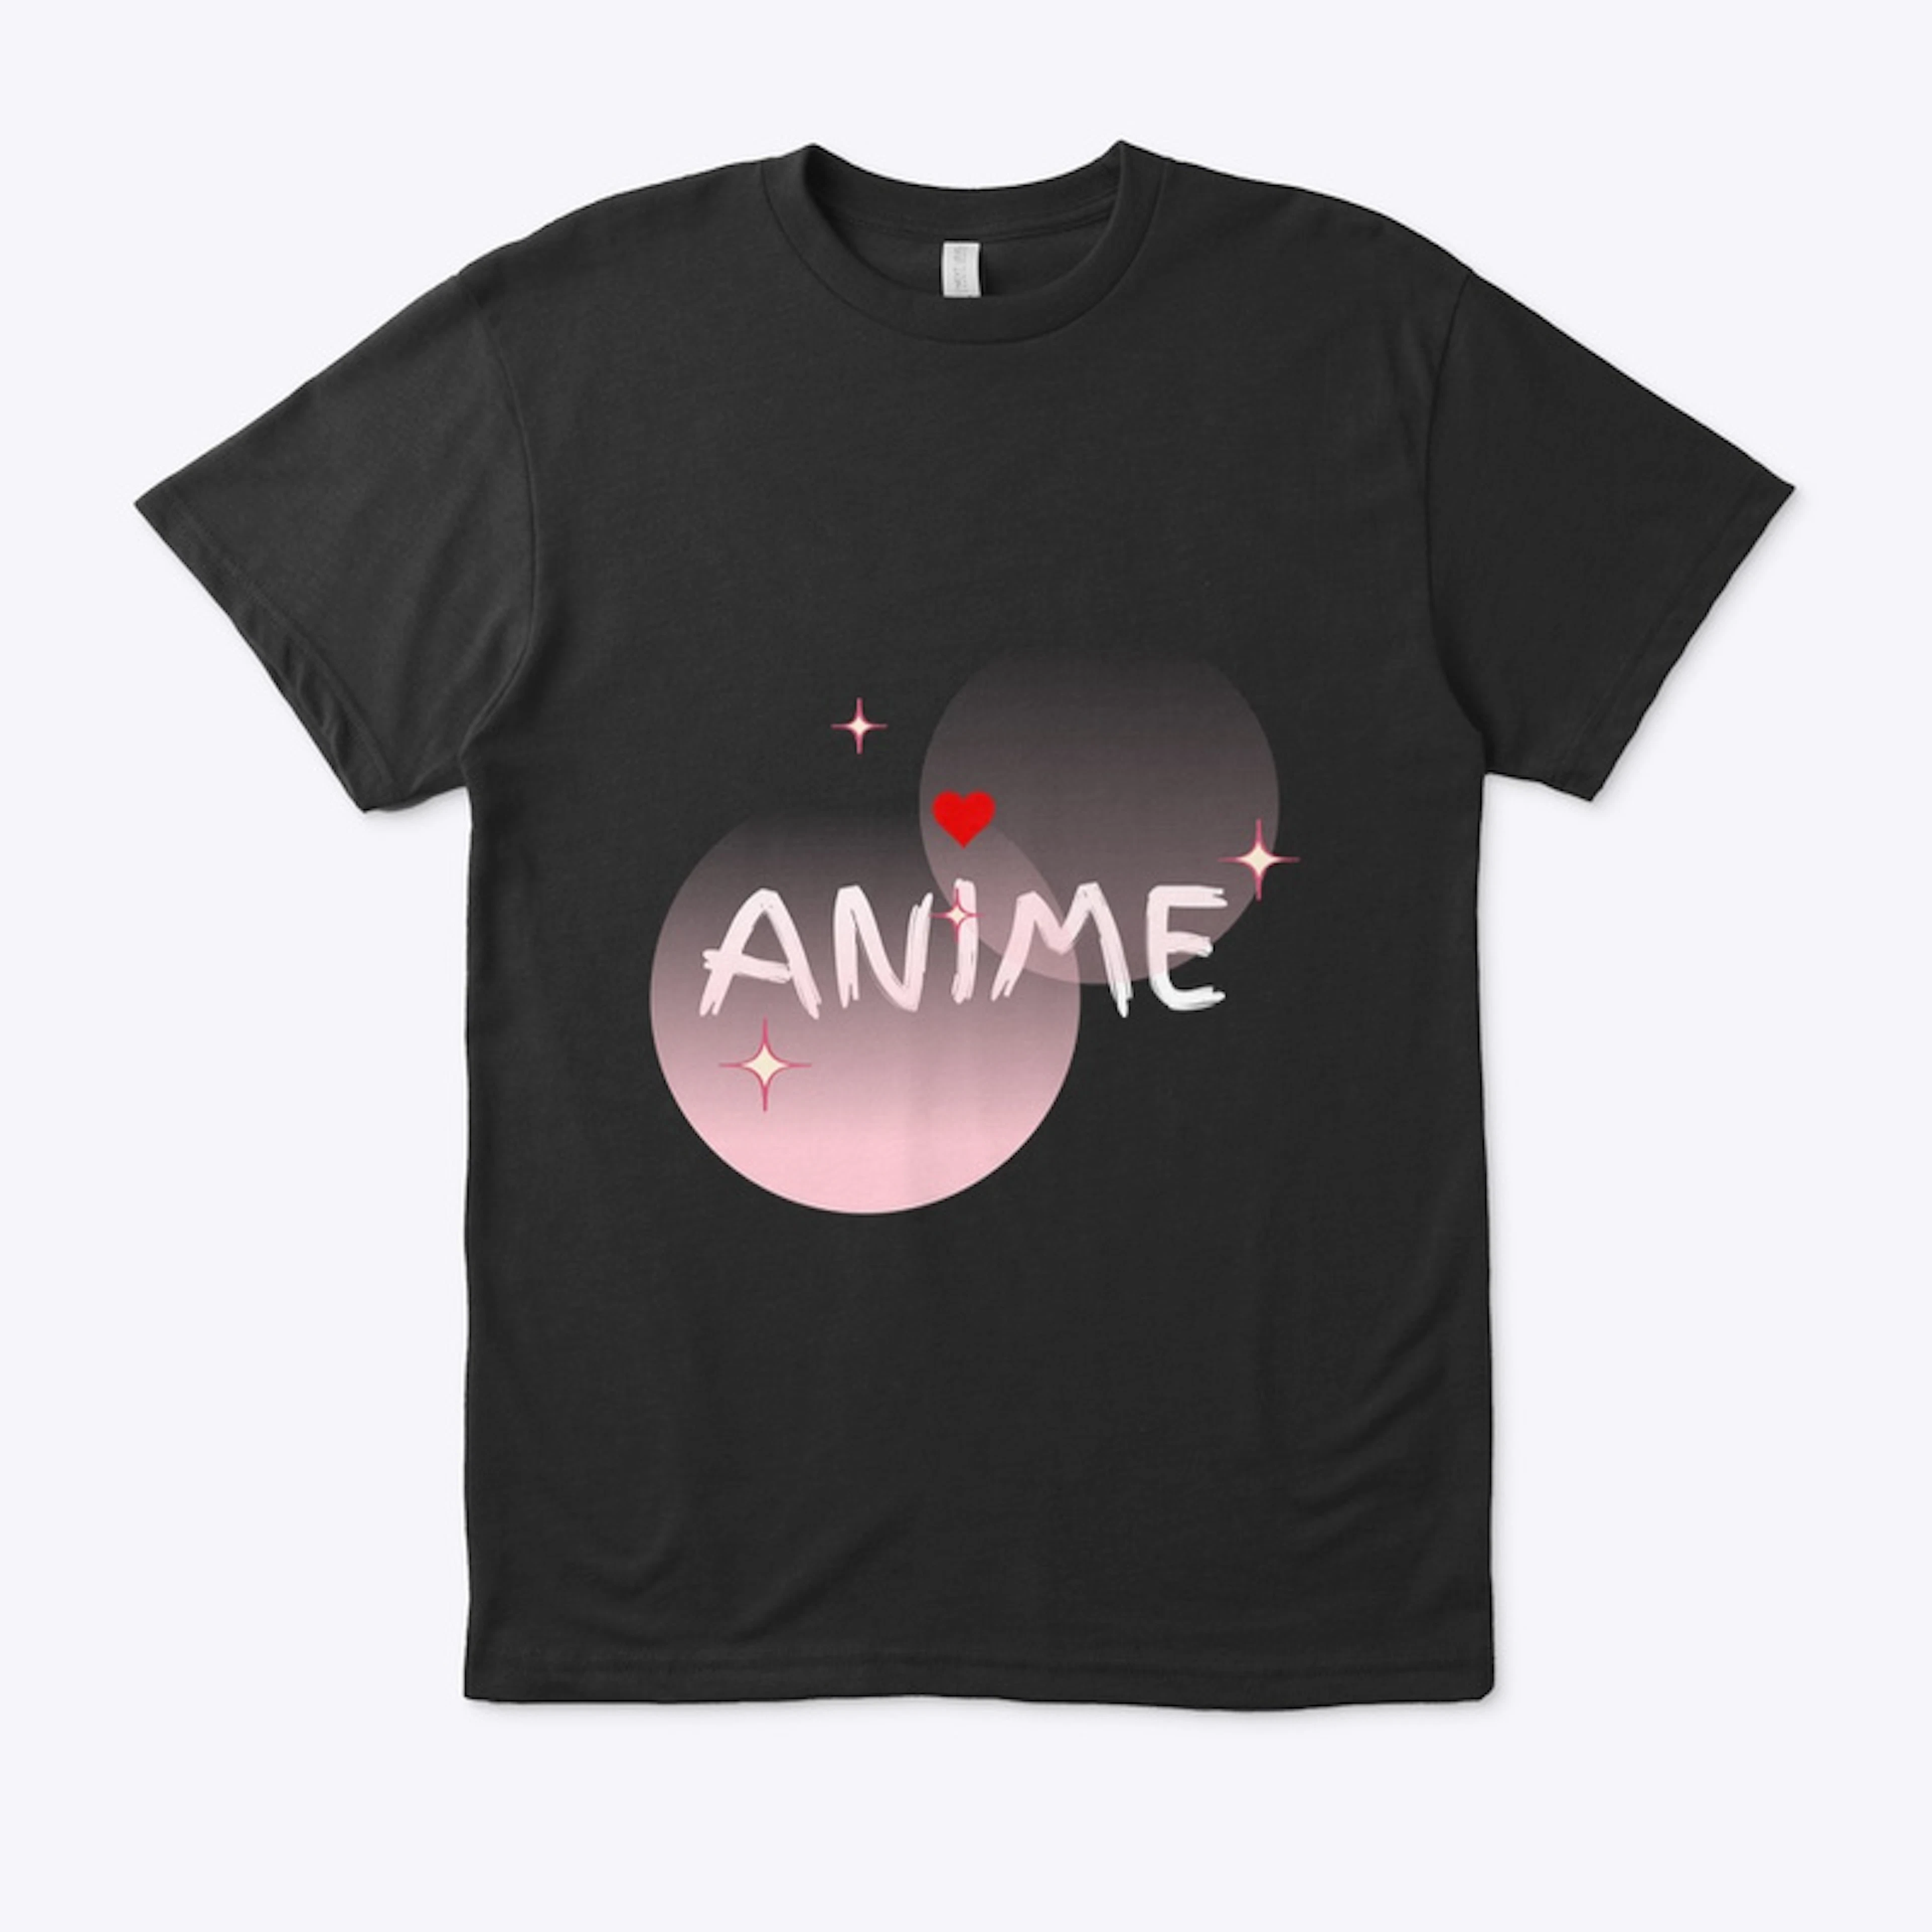 We love anime over here